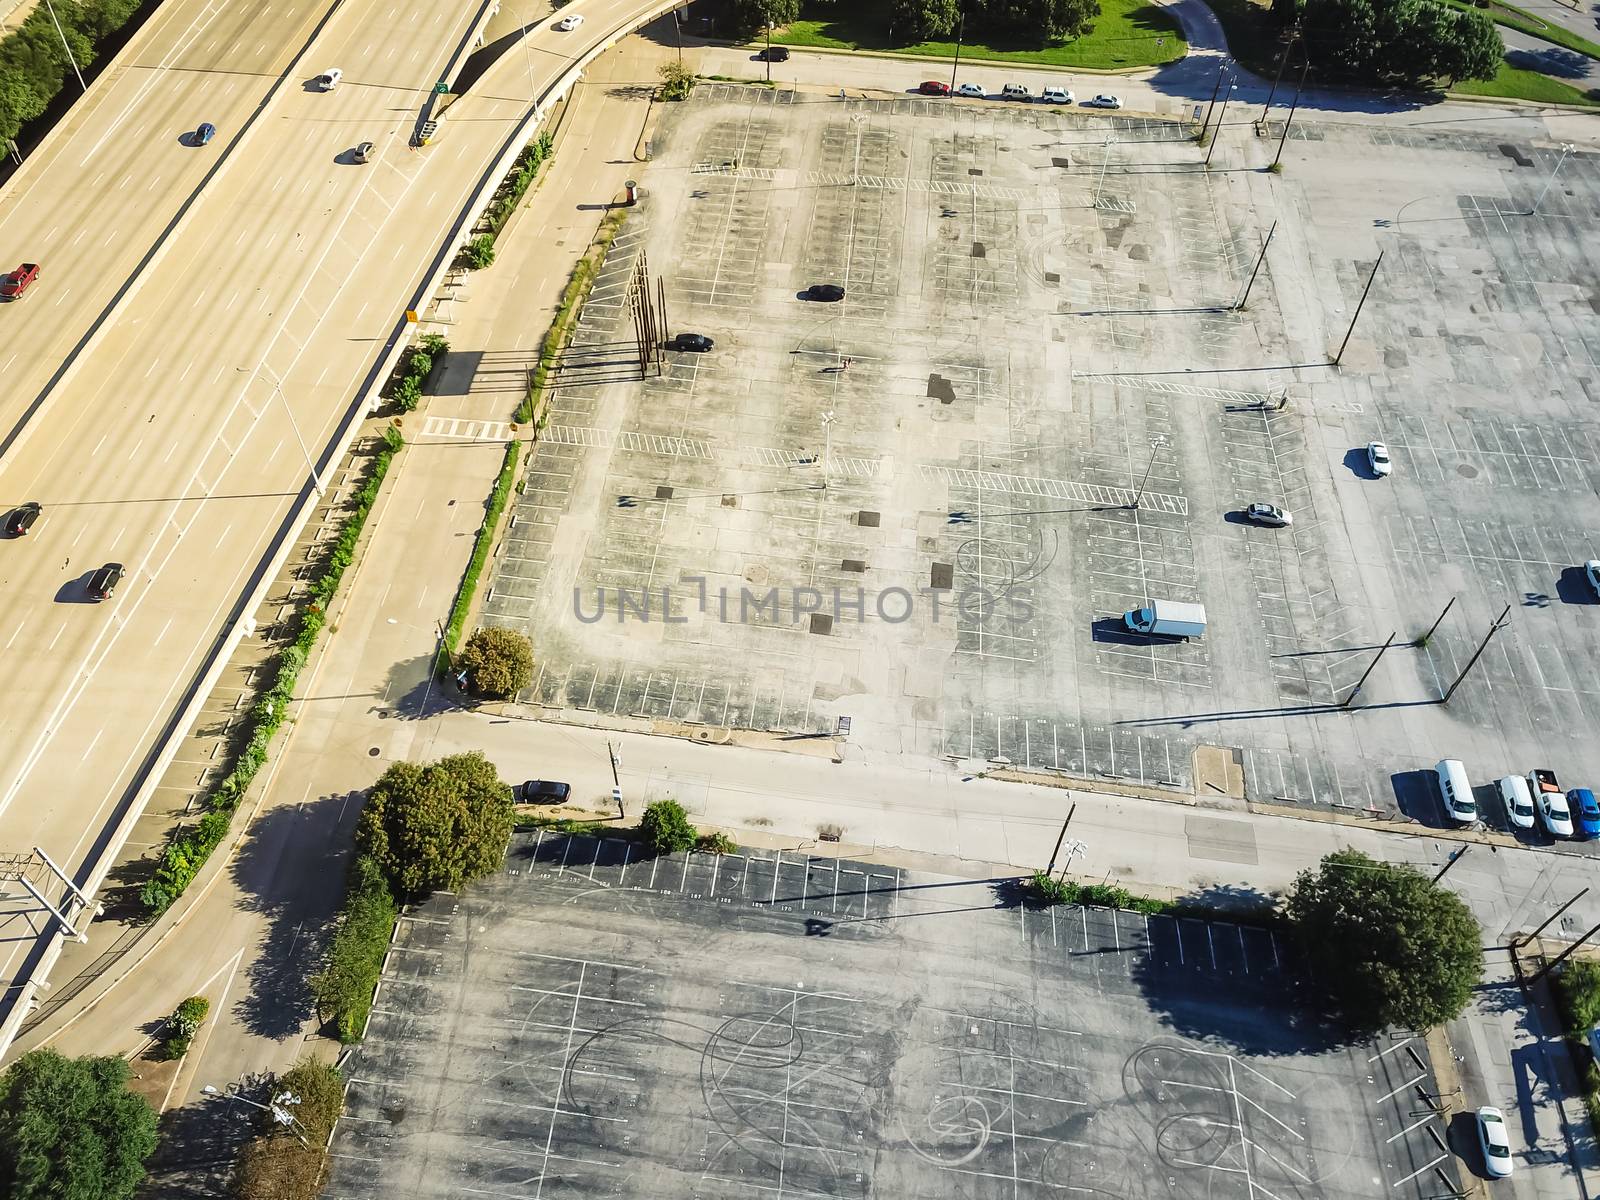 Aerial view parking lots with vacant spaces near expressway in d by trongnguyen